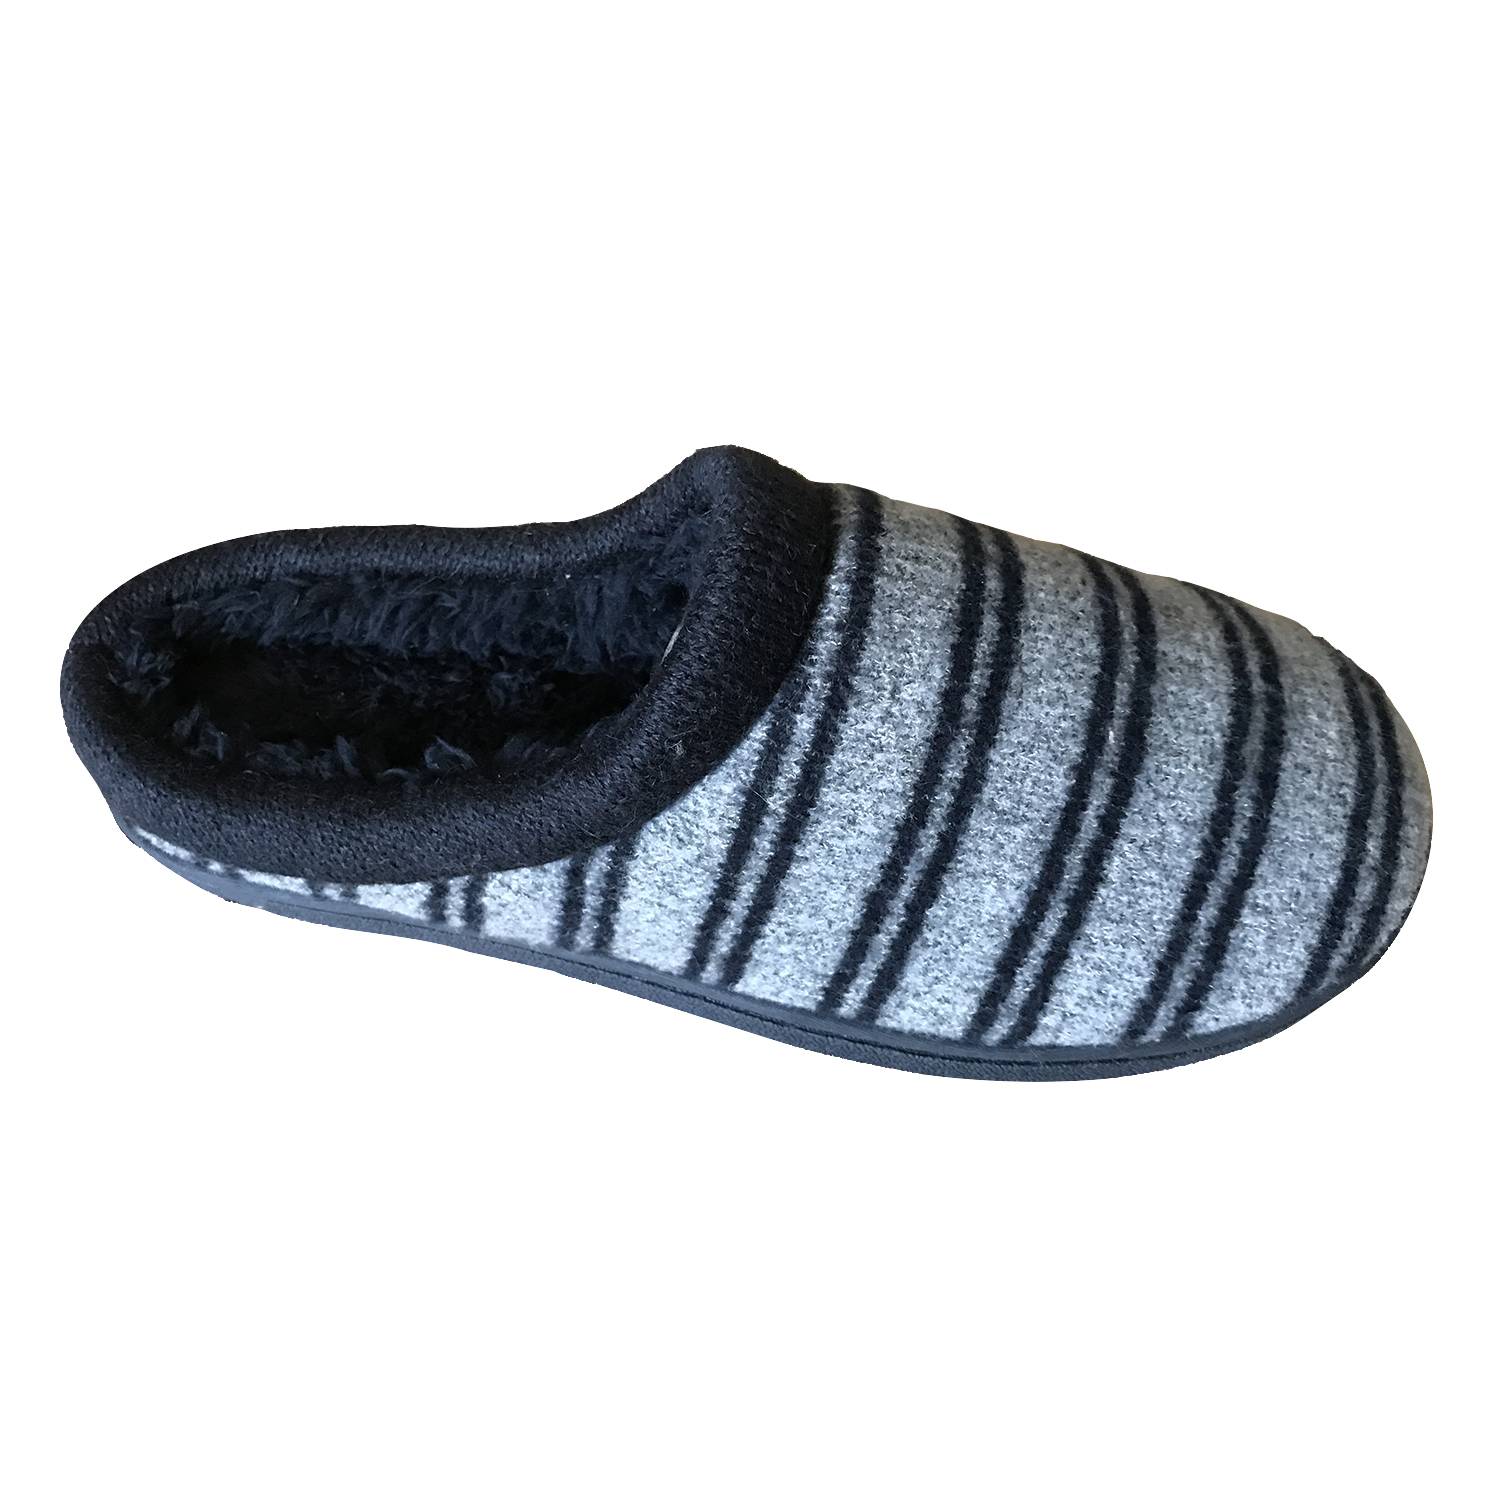 Men’s Comfortable Memory Foam House Slippers Non Slip Featured Image